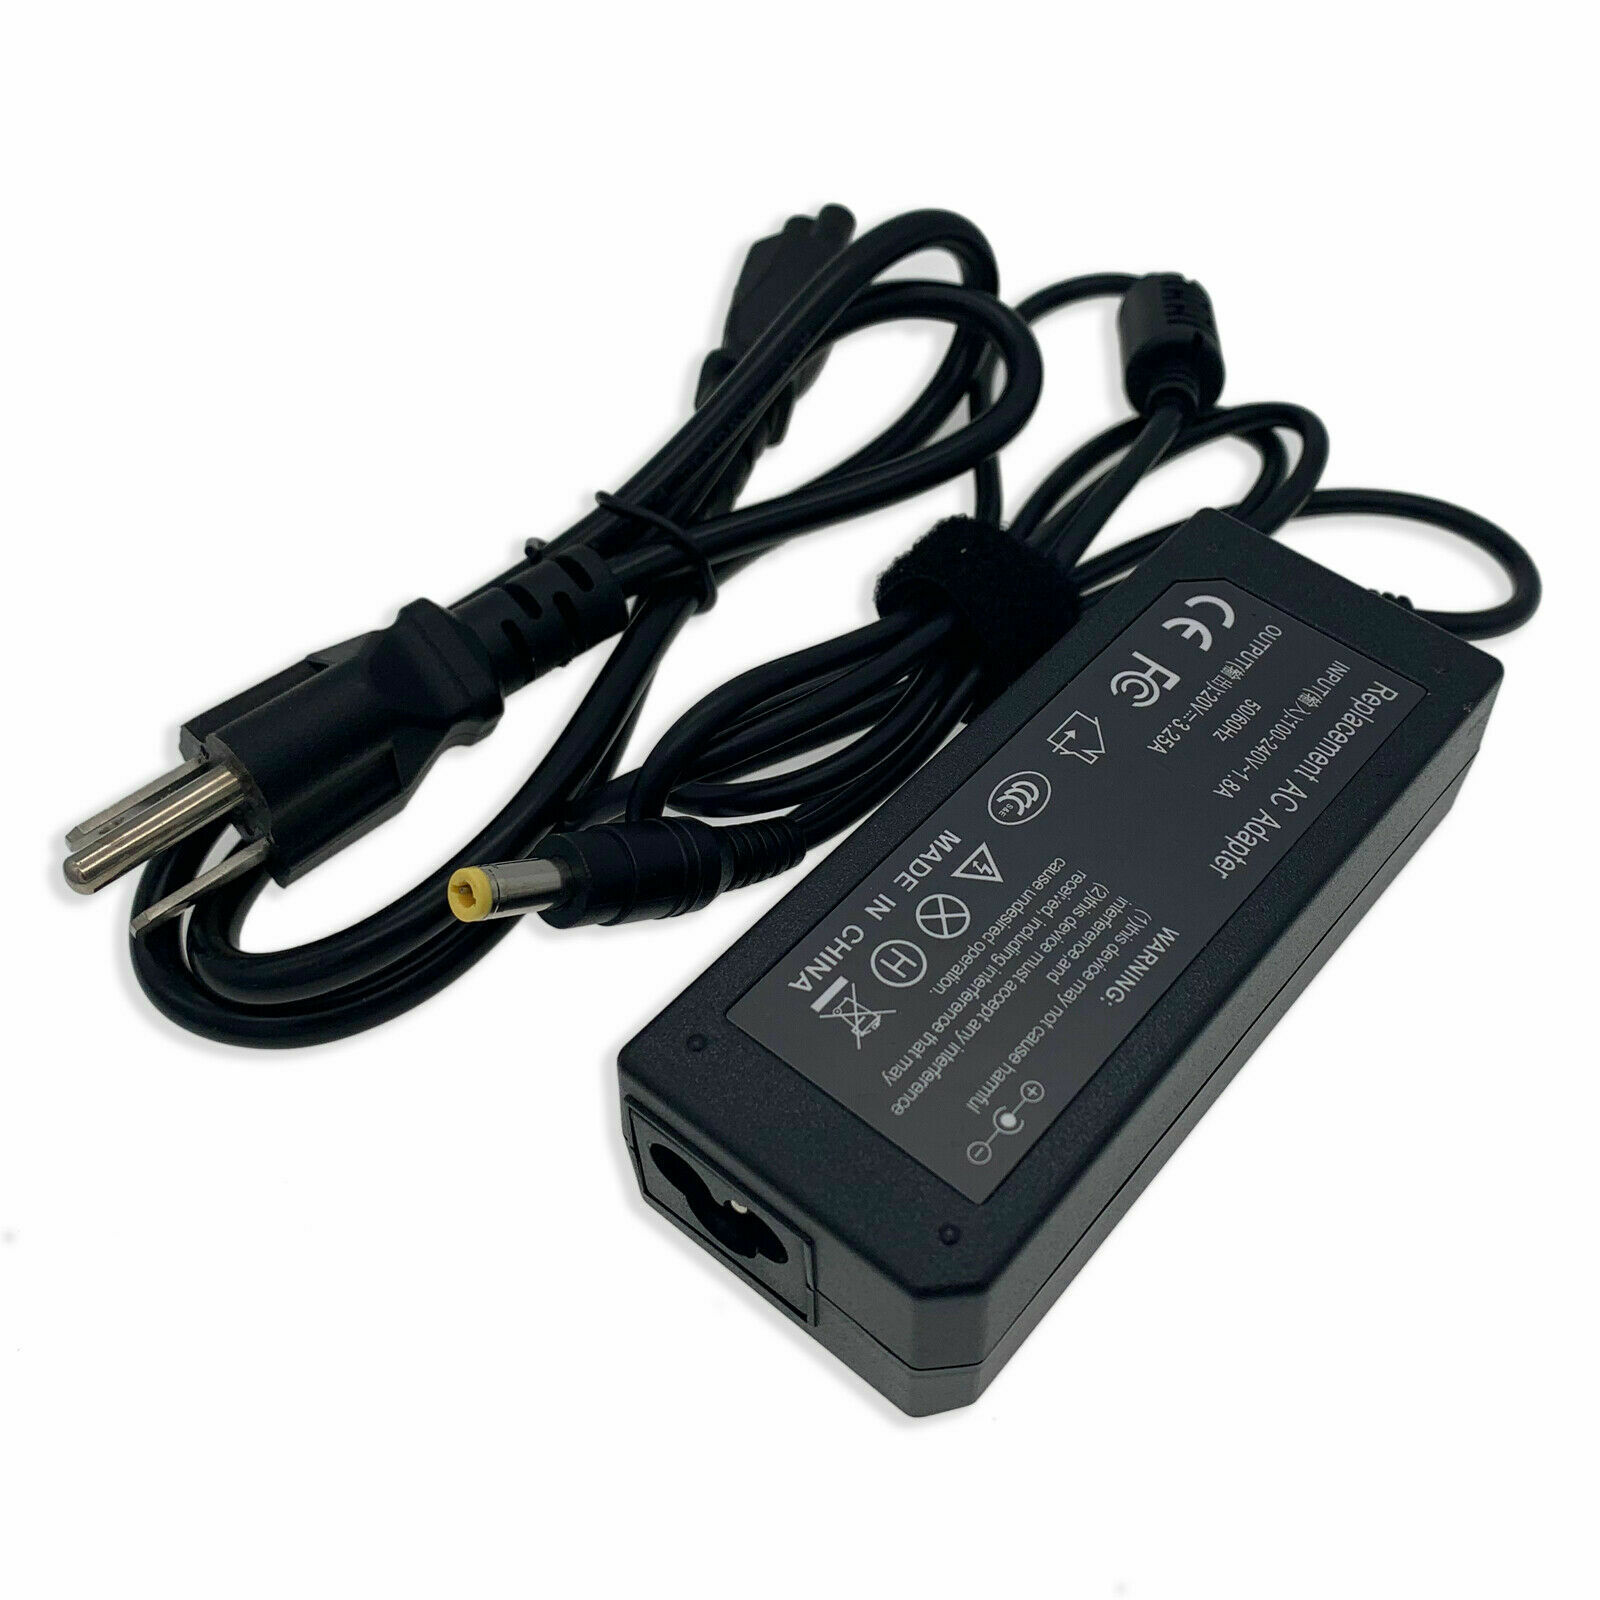 AC Adapter Charger for JBL Boombox Portable Wireless Speaker 20V Power Supply Compatible Brand: Universal Type: Pow